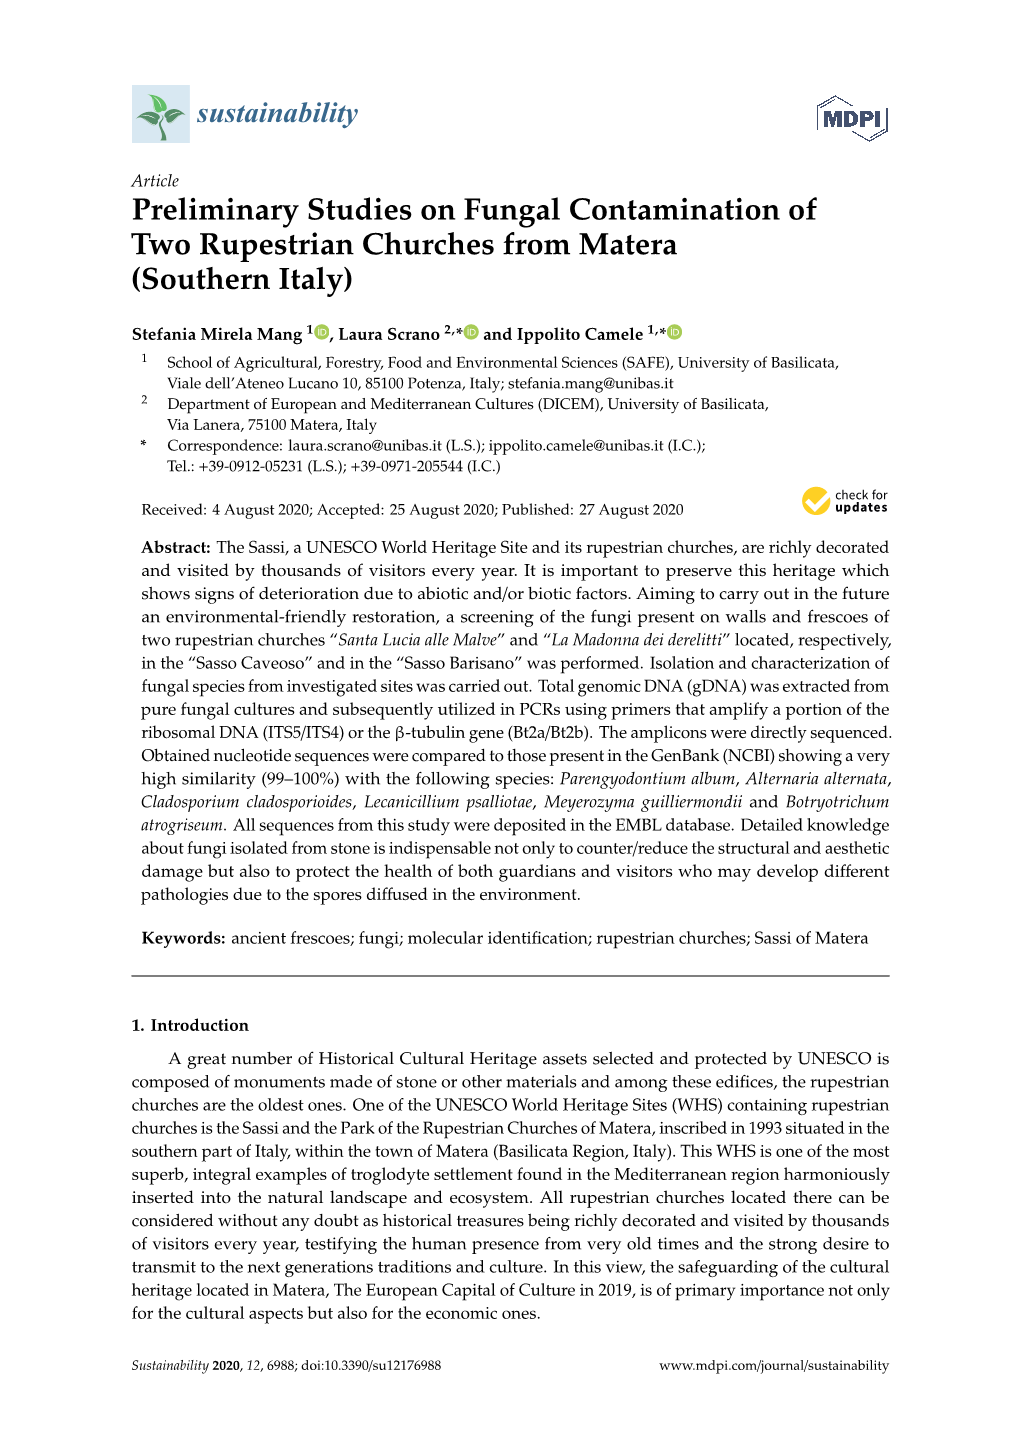 Preliminary Studies on Fungal Contamination of Two Rupestrian Churches from Matera (Southern Italy)